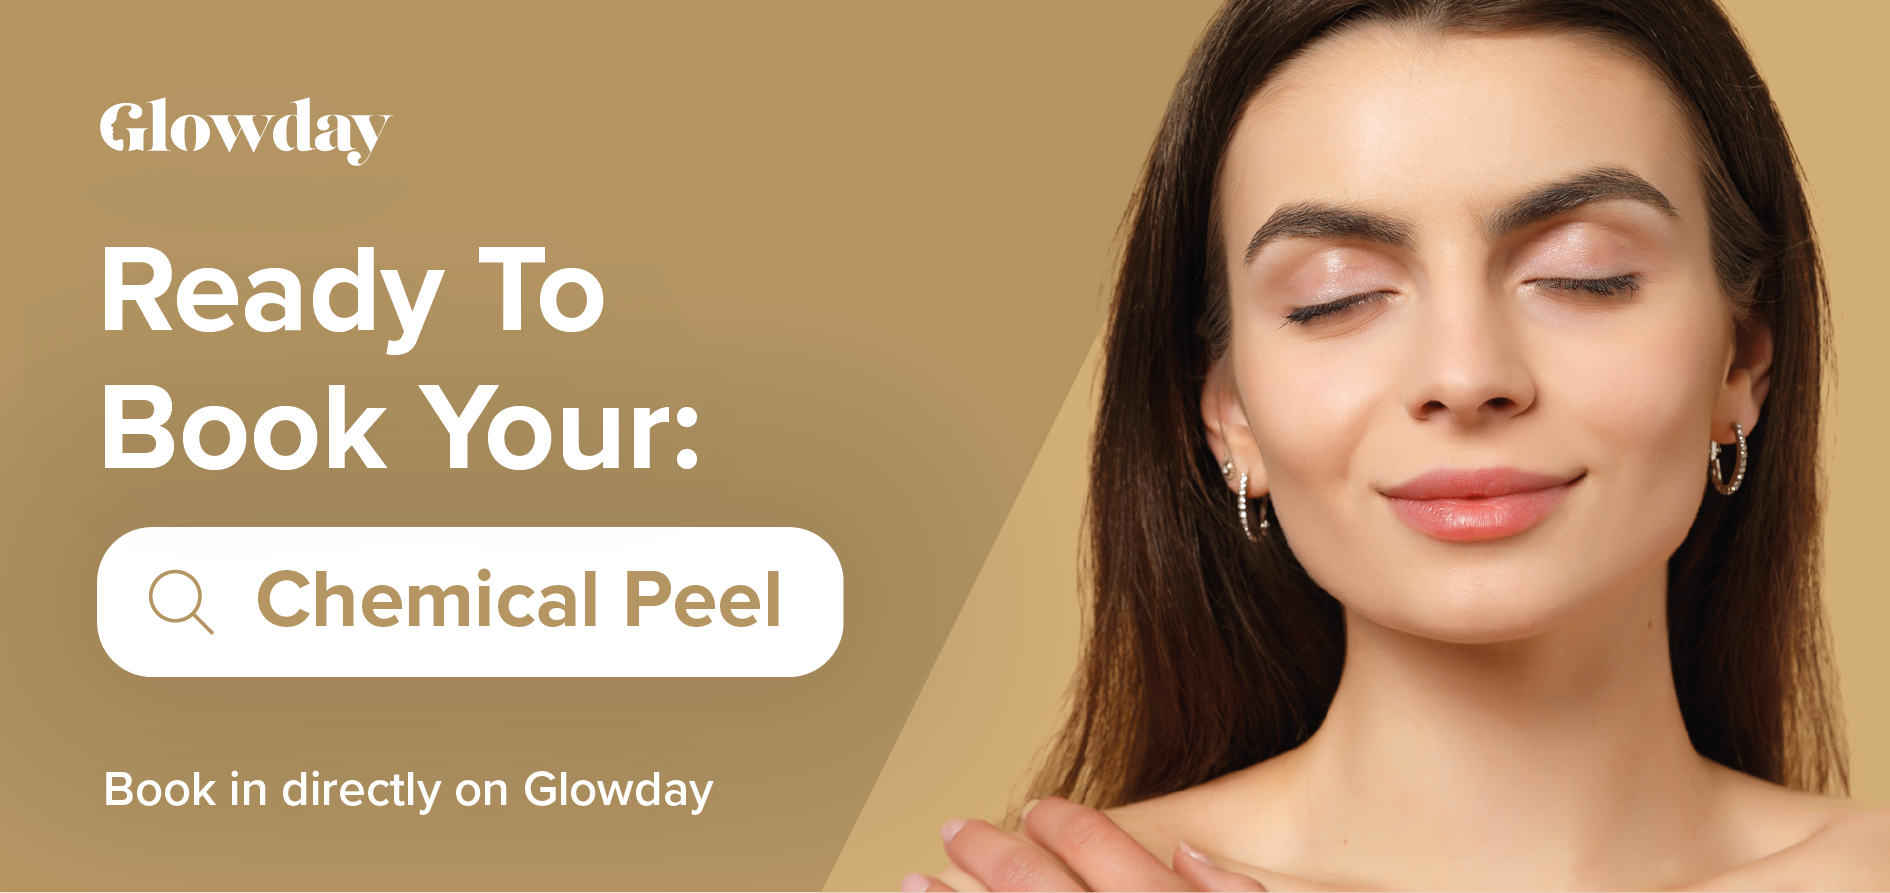 Chemical peel aftercare dos and donts Glowday photo